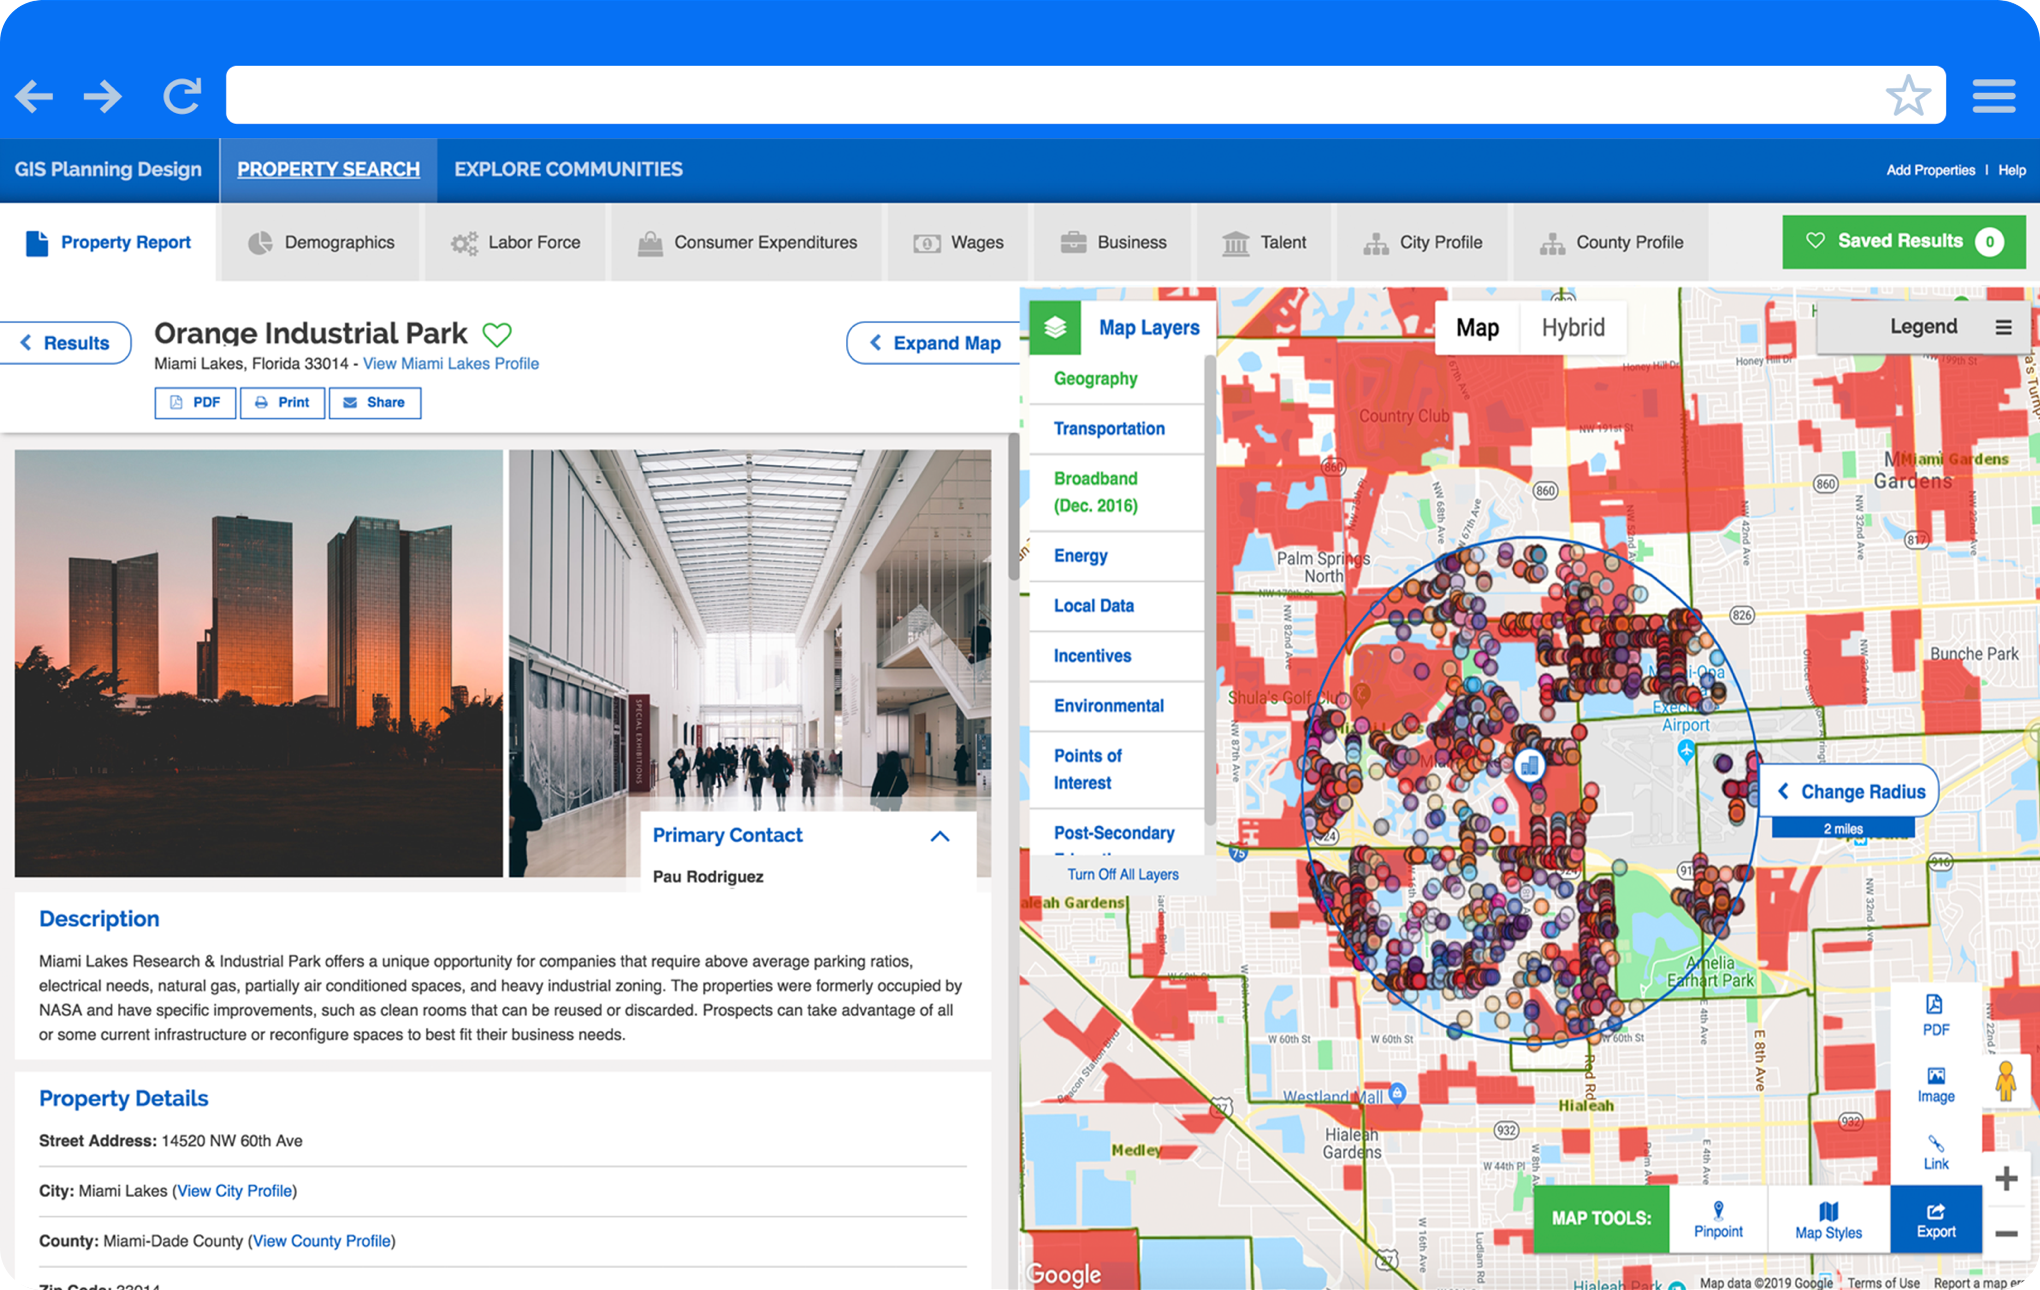 Drive investment to your location with mobile-friendly, interactive GIS data tools